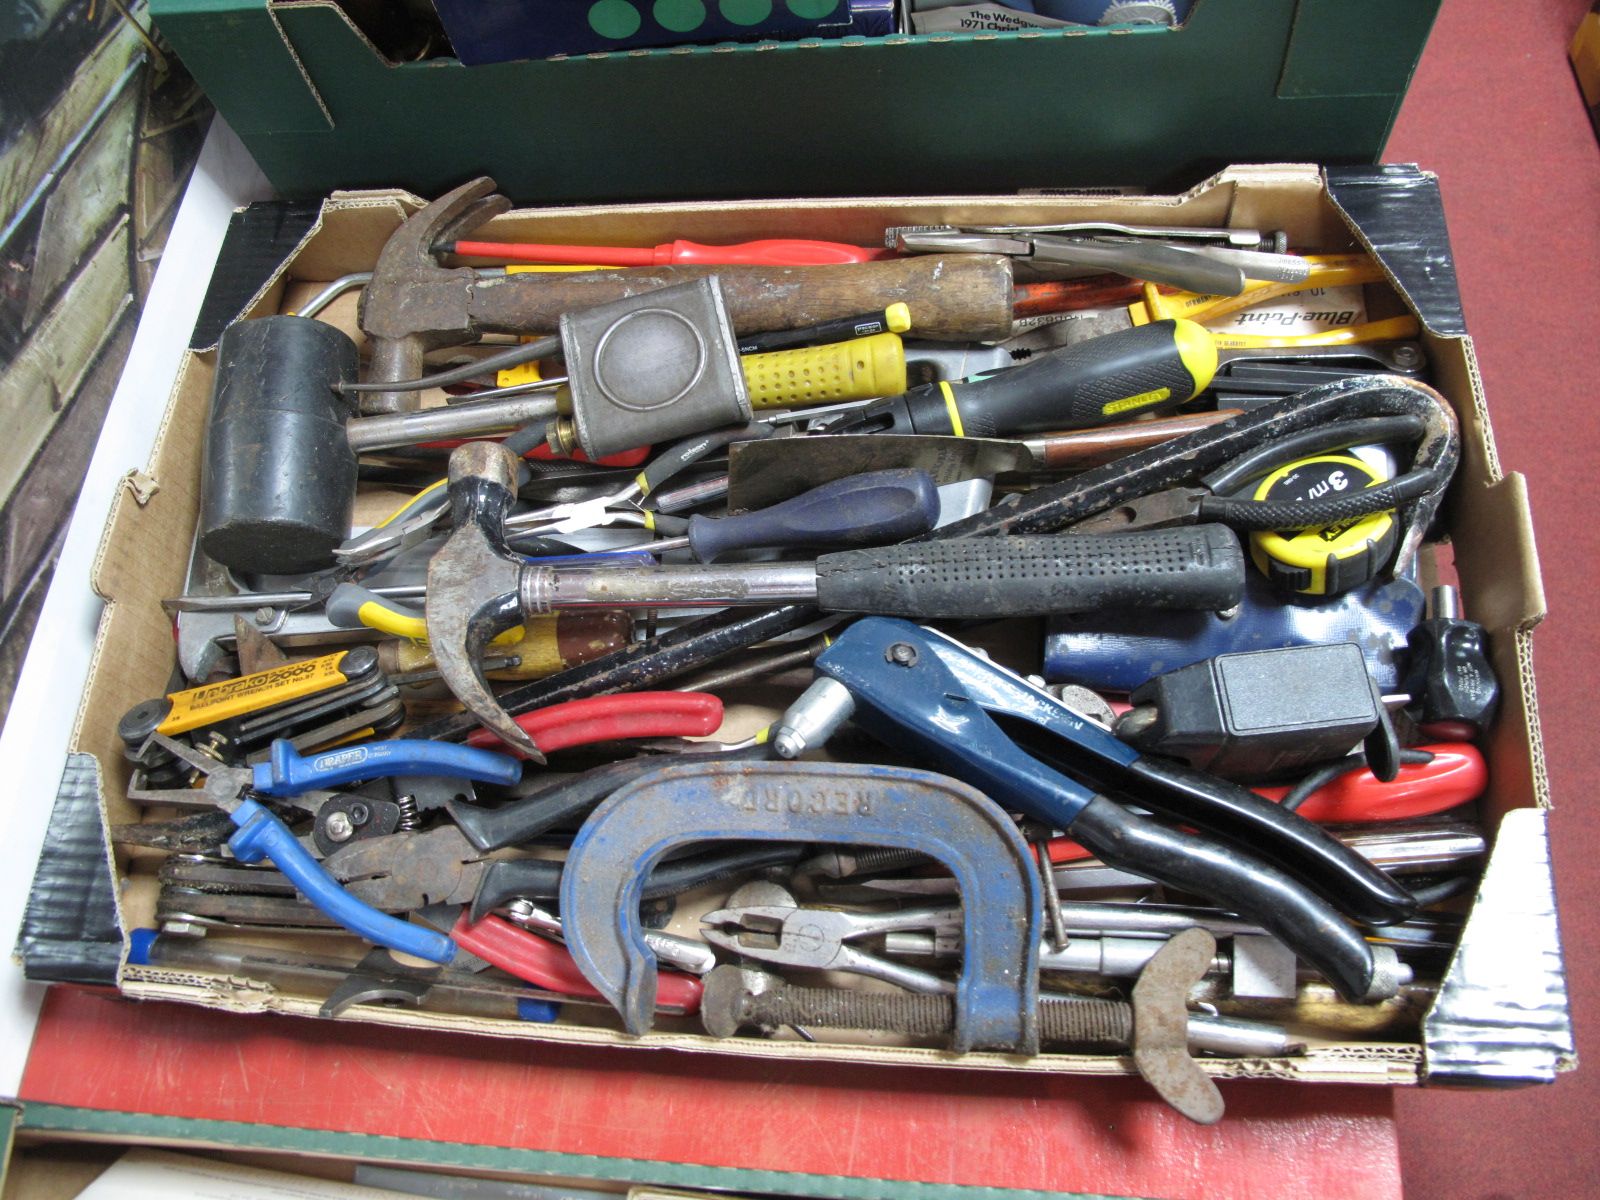 DIY Tools, including wrenches, hammers, pliers, clamps, crow bar, etc:- One Box